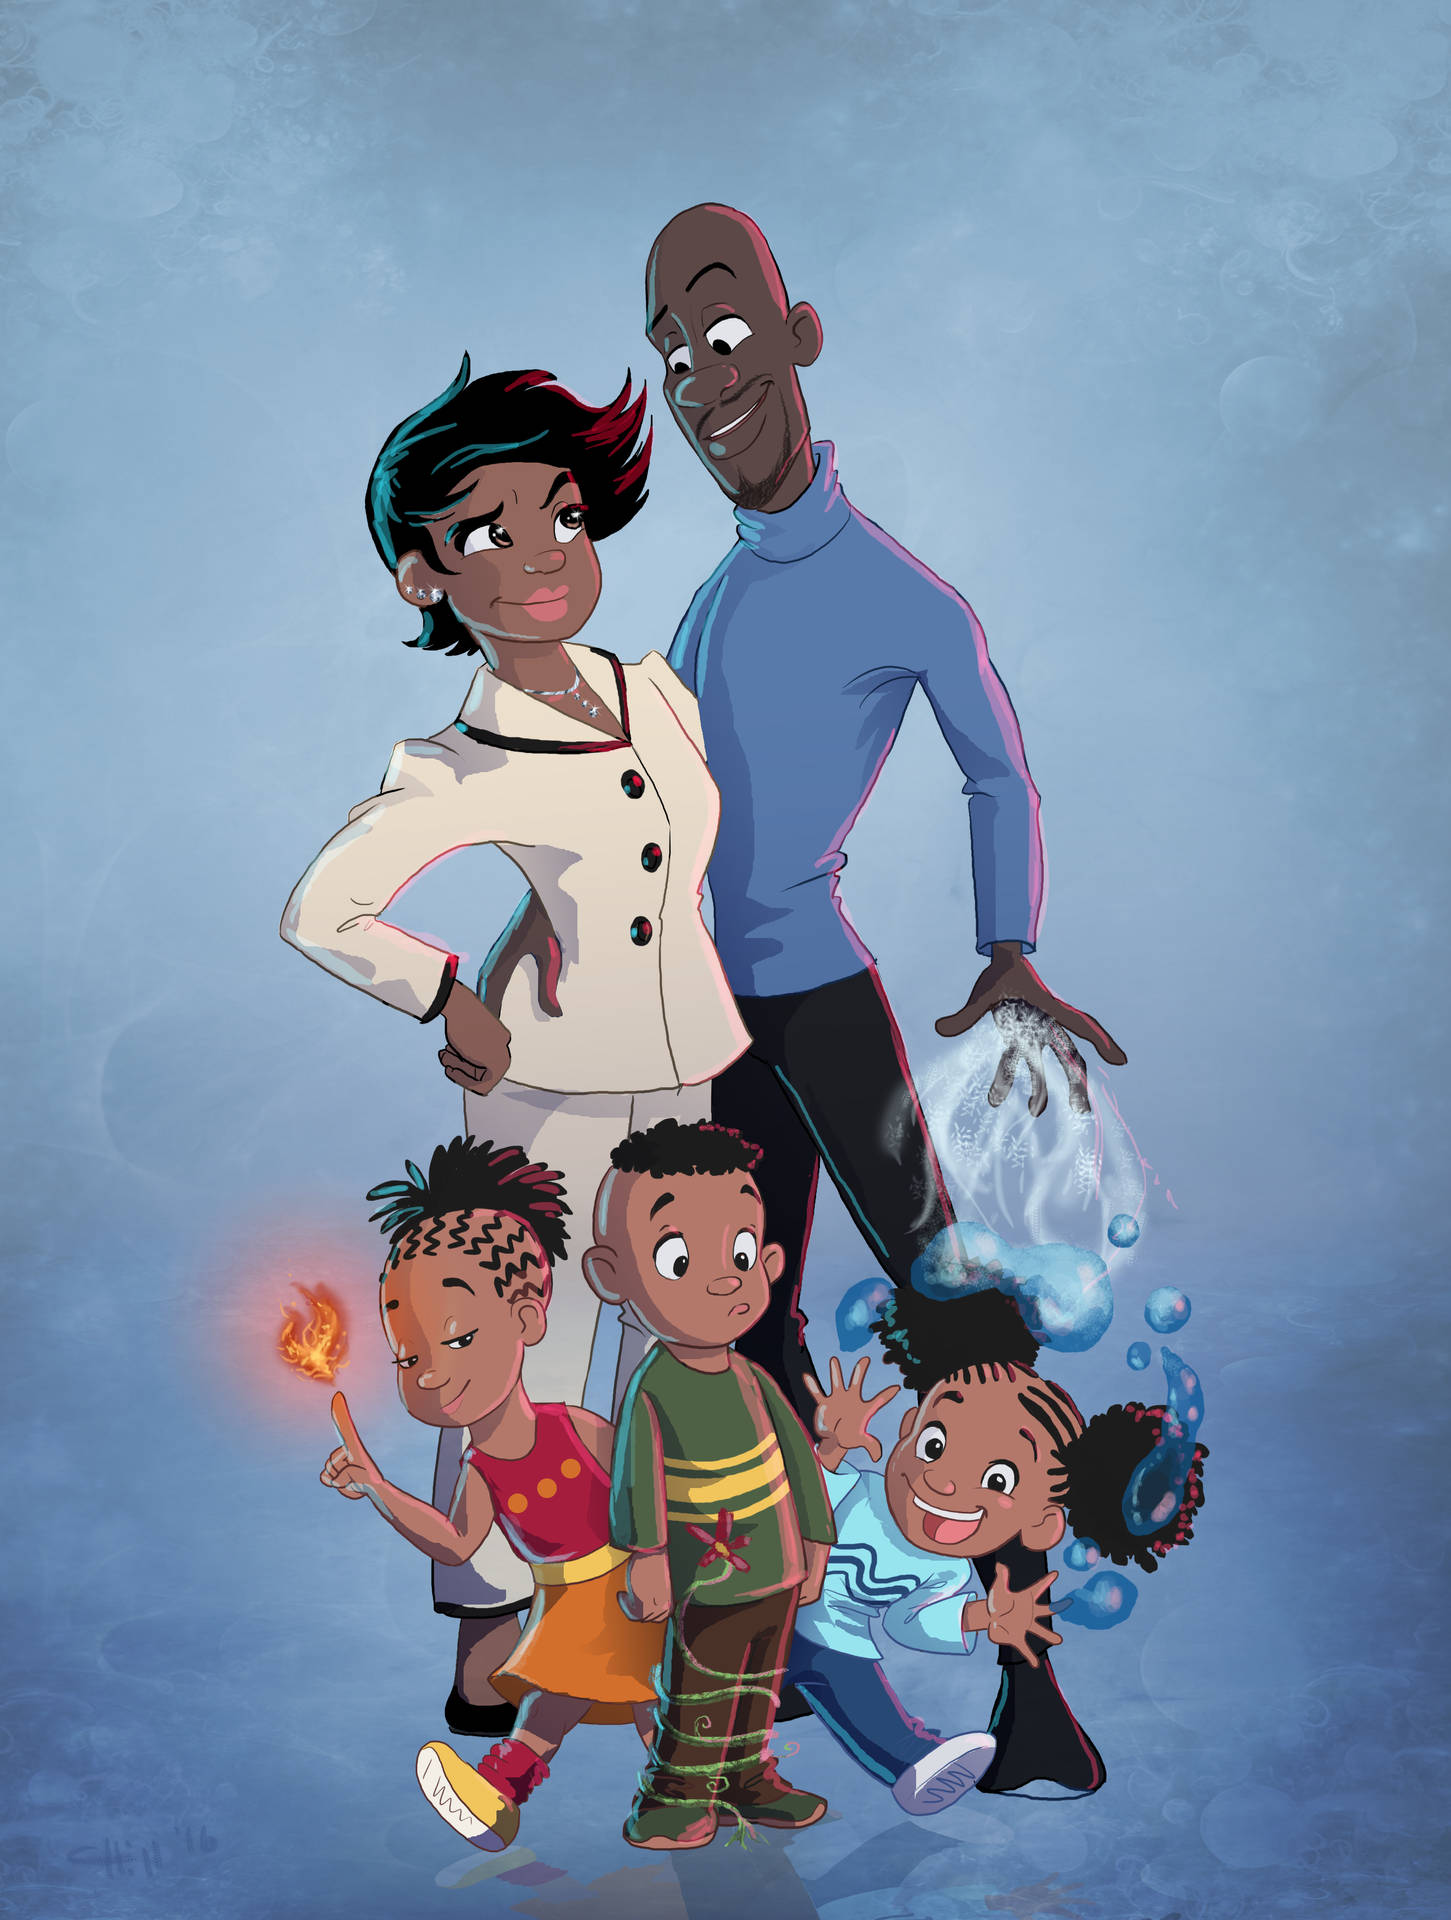 Frozone With His Family In An Animated Movie Scene